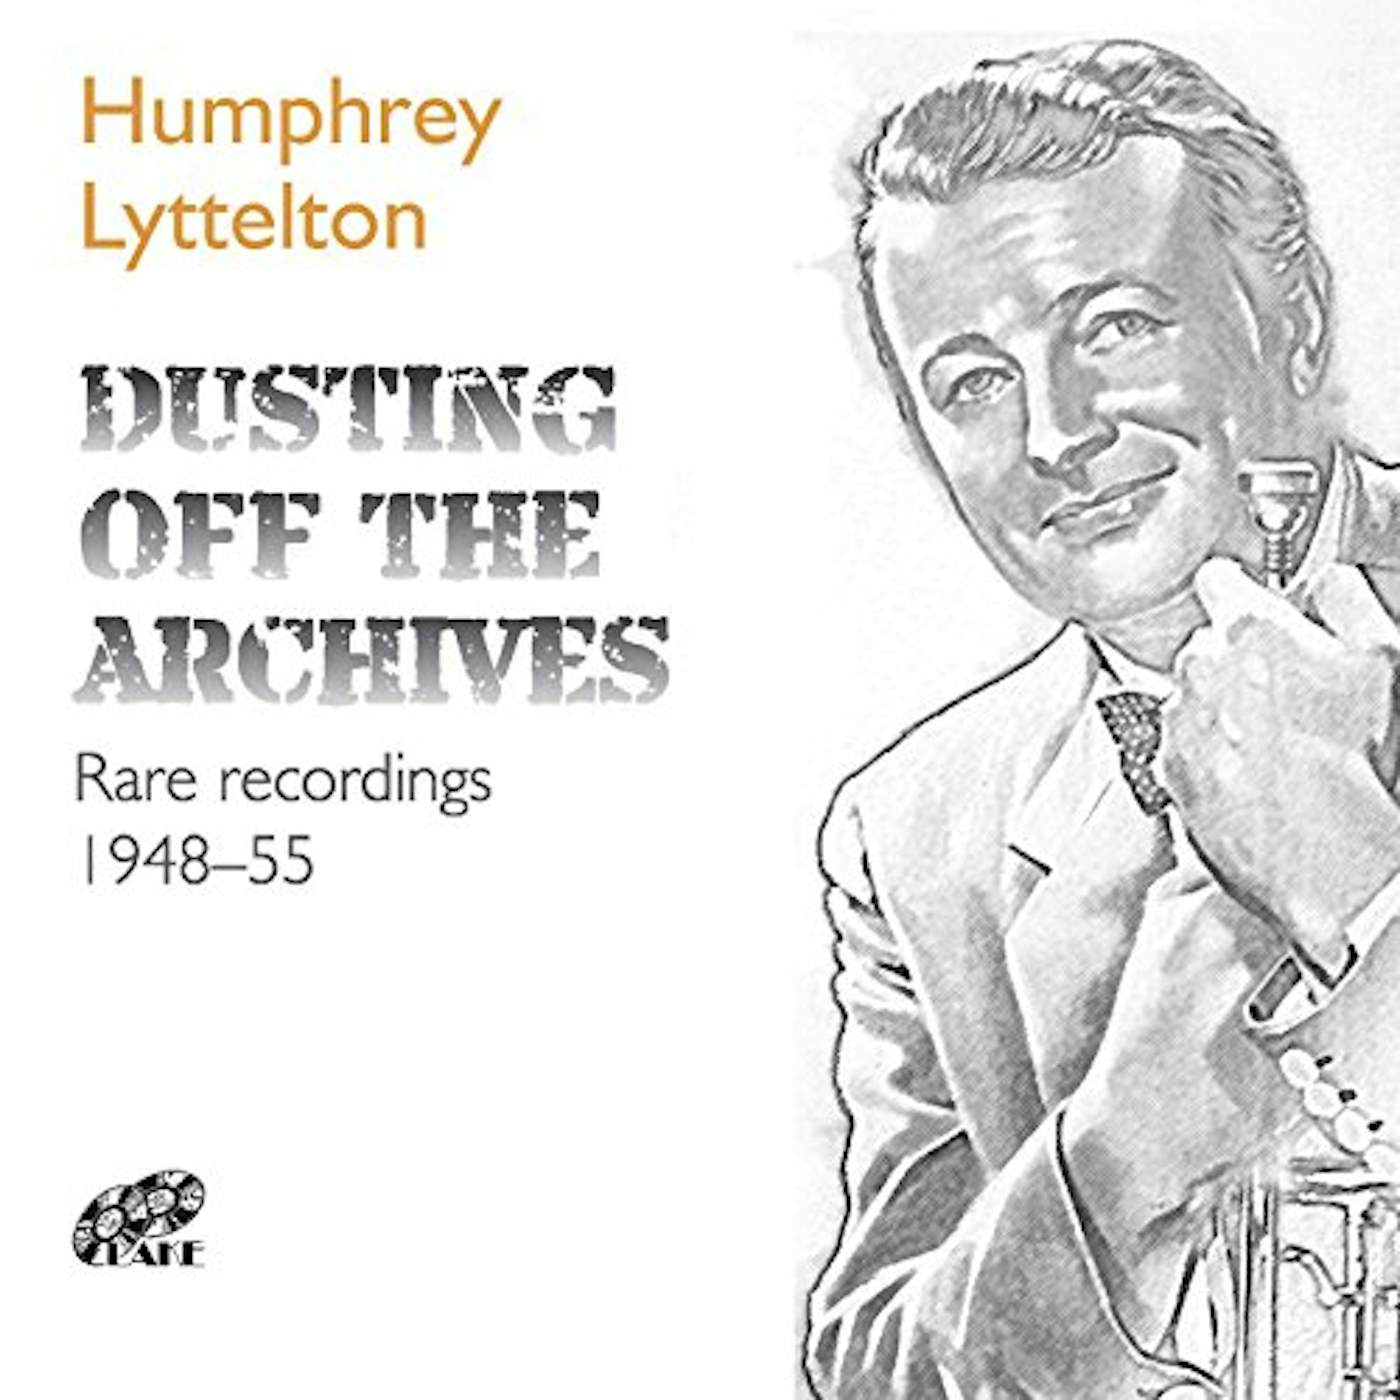 Humphrey Lyttelton DUSTING OFF THE ARCHIVES CD